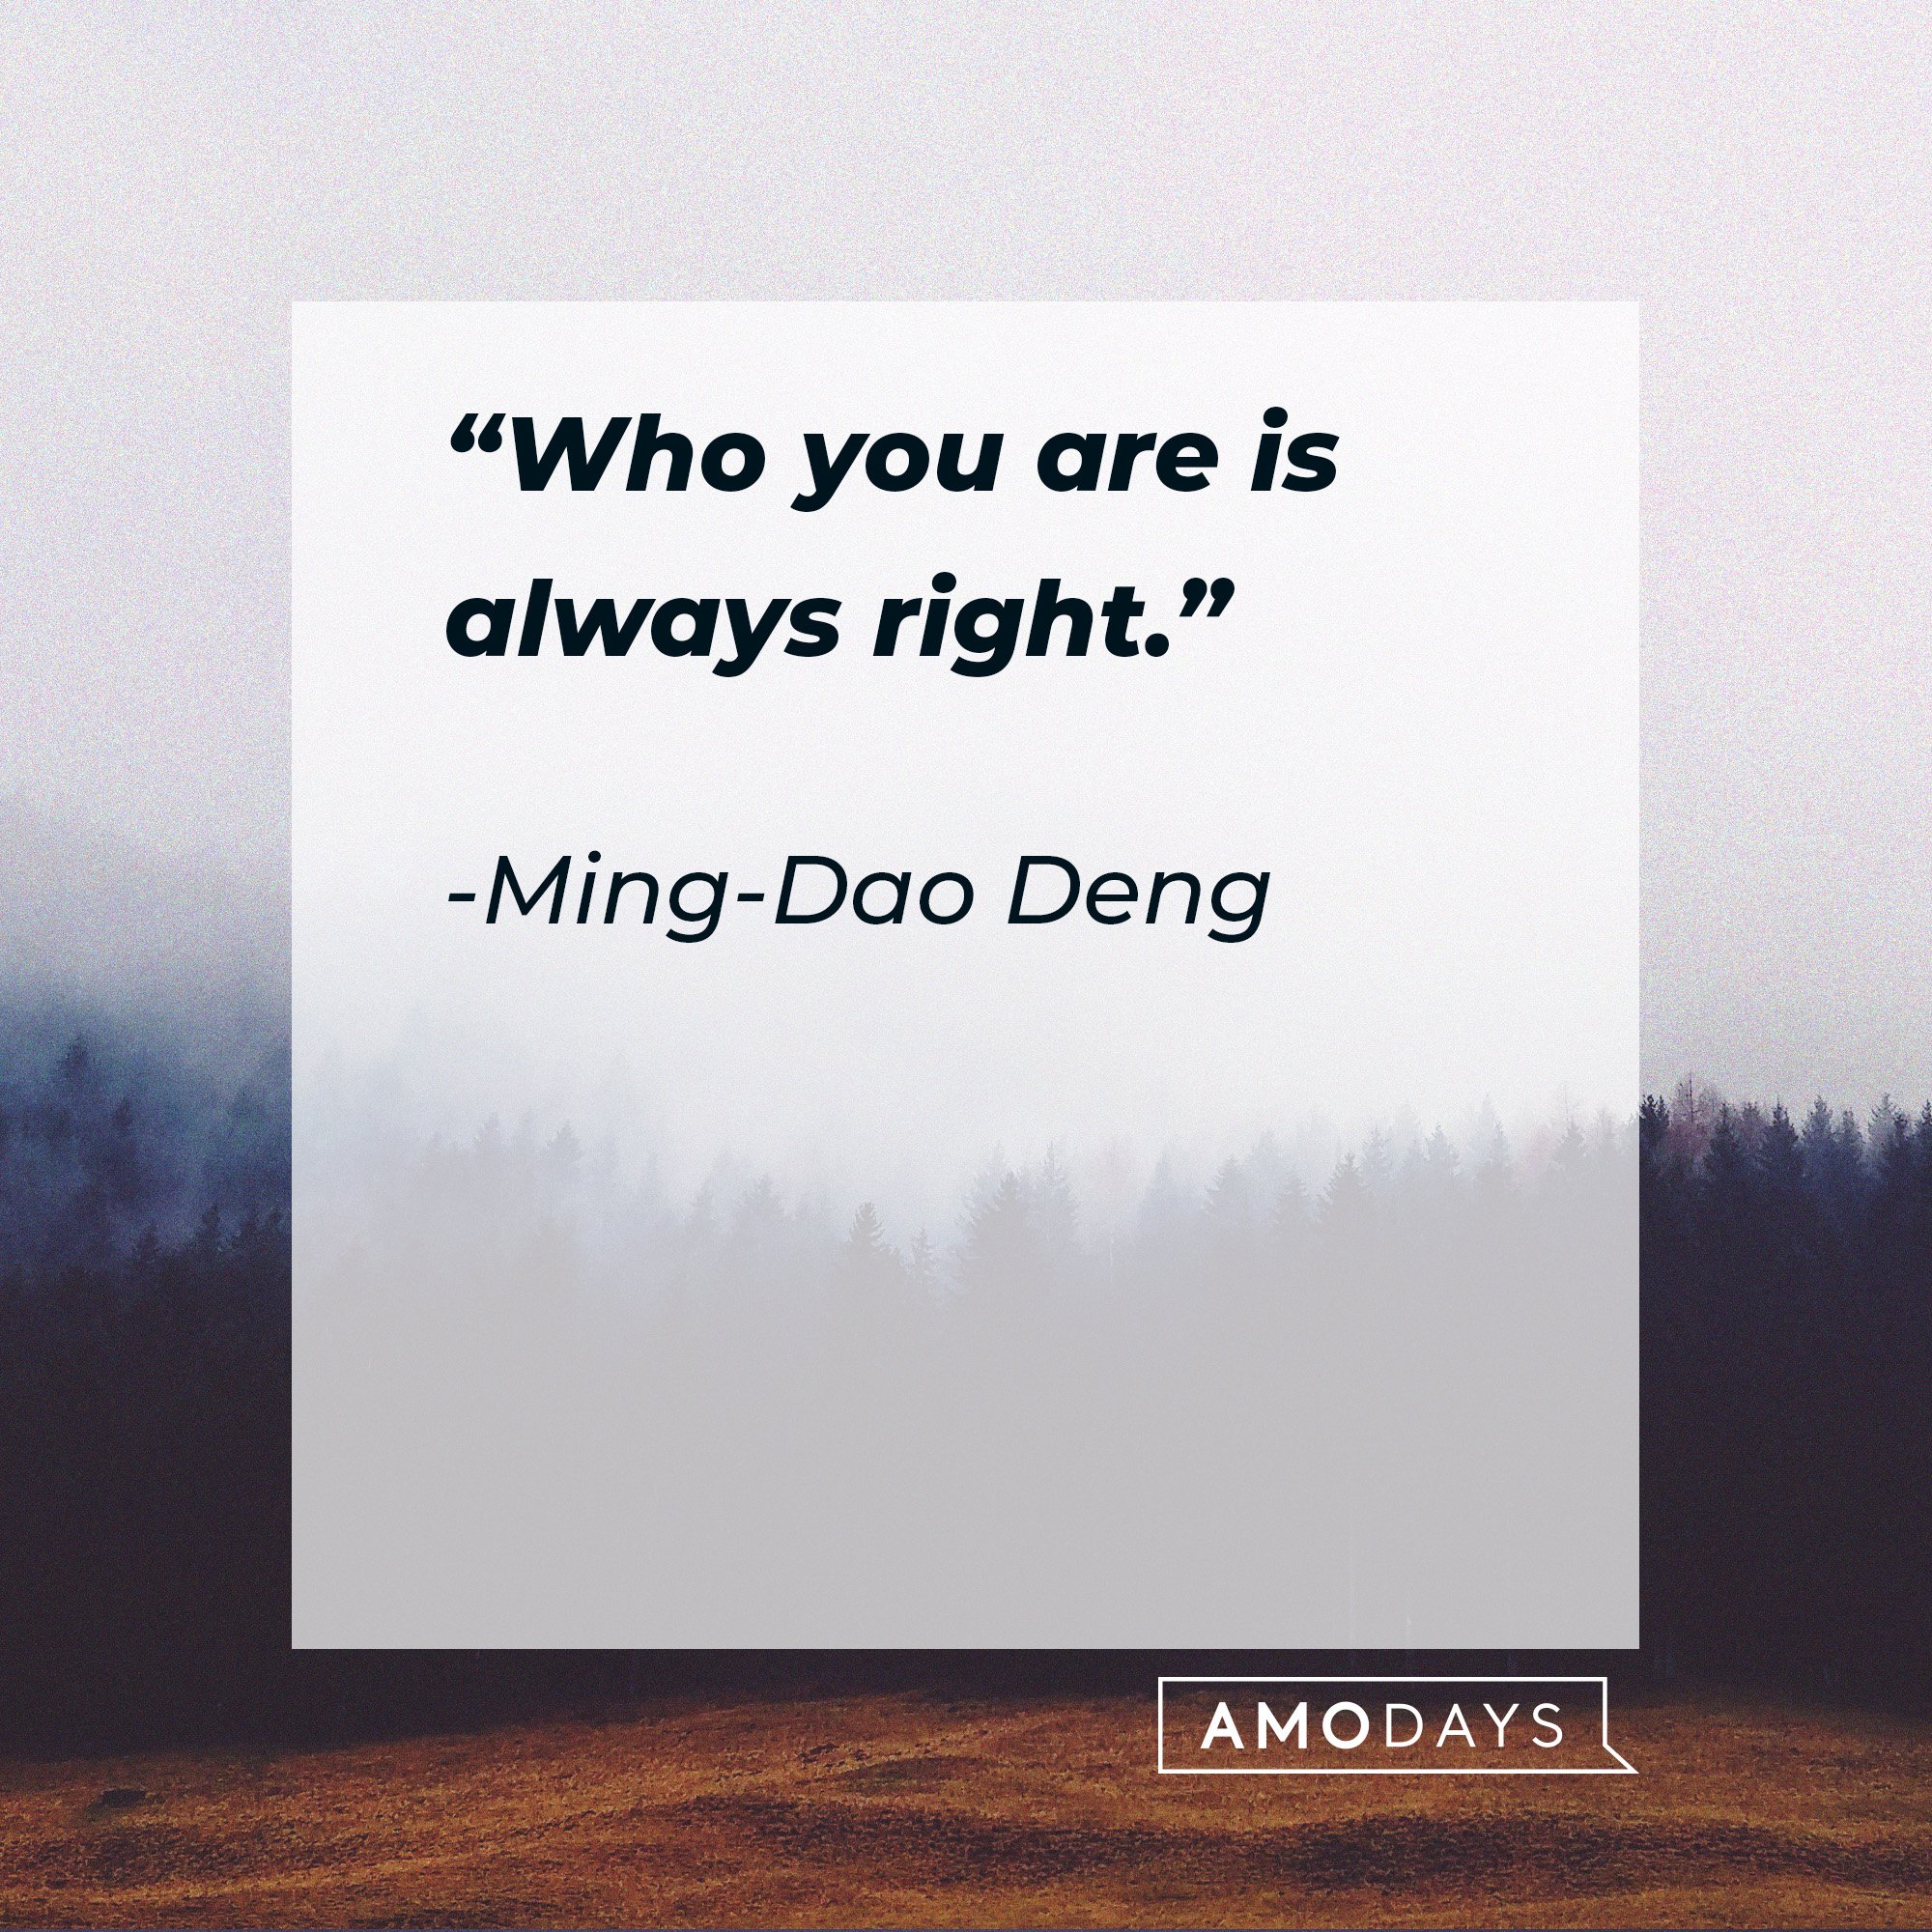 Ming-Dao Deng 's quote: “Who you are is always right.” | Image: AmoDays